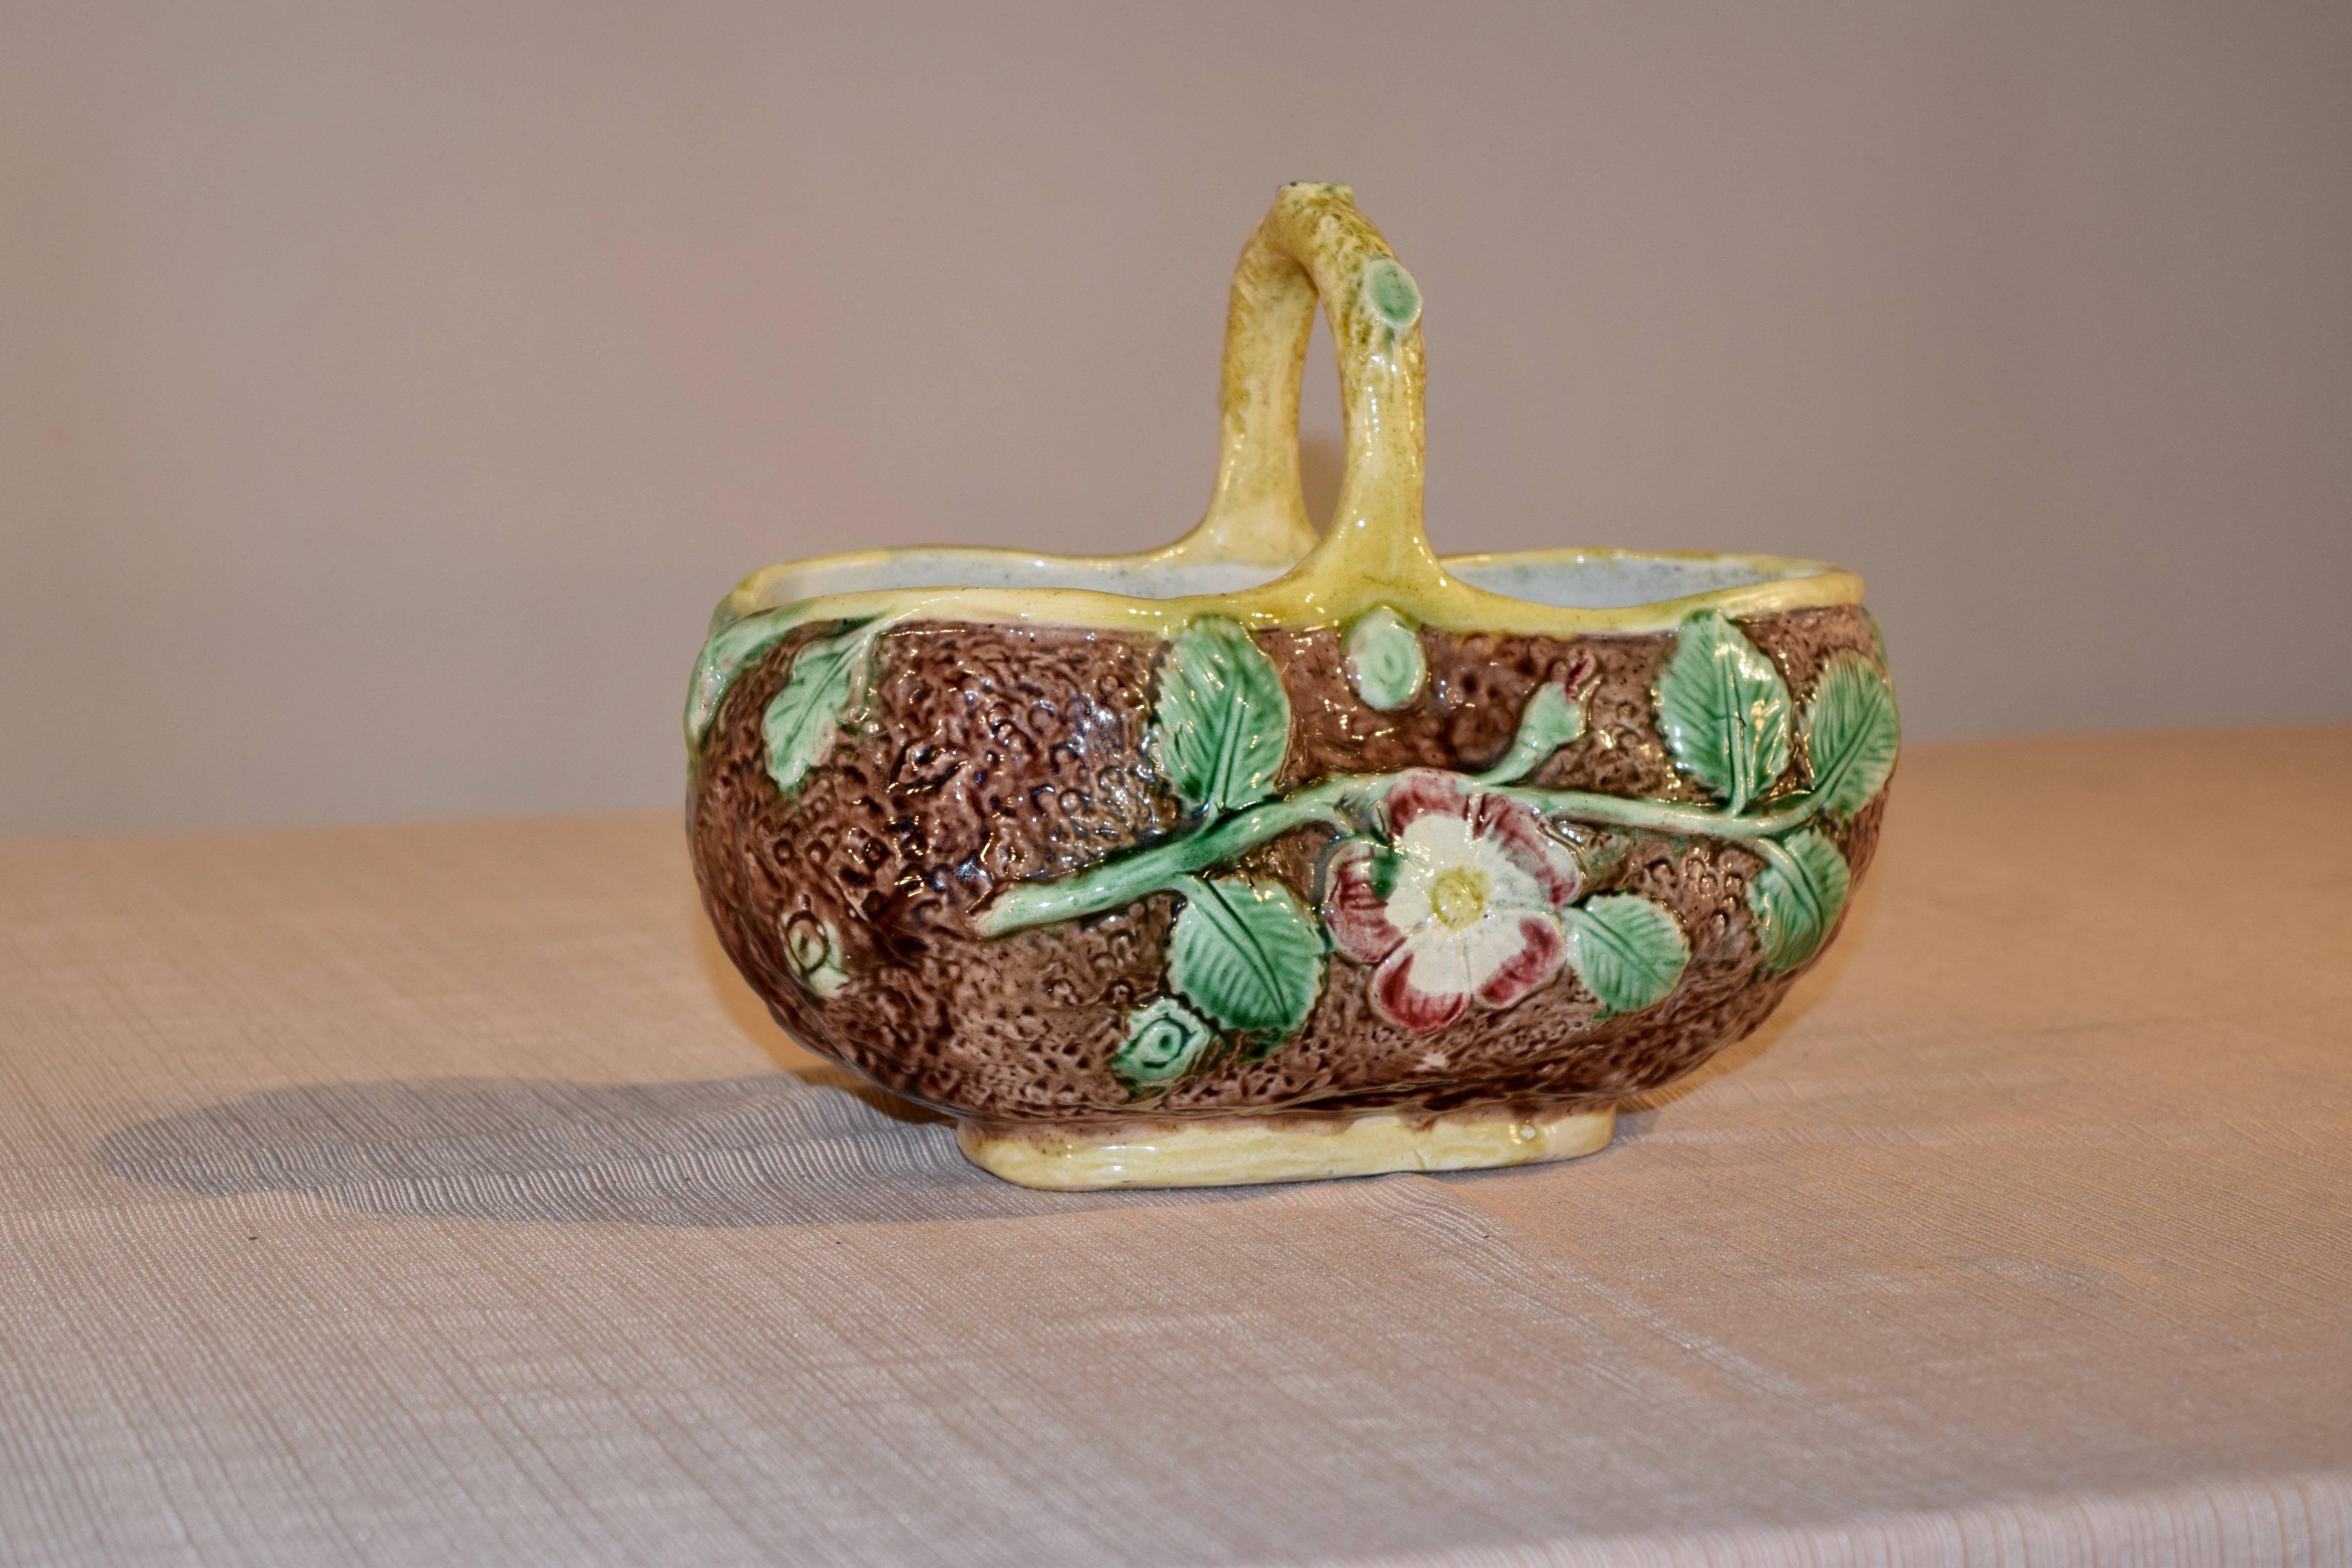 19th century Majolica basket from England in the form of a log with flowers and vines.